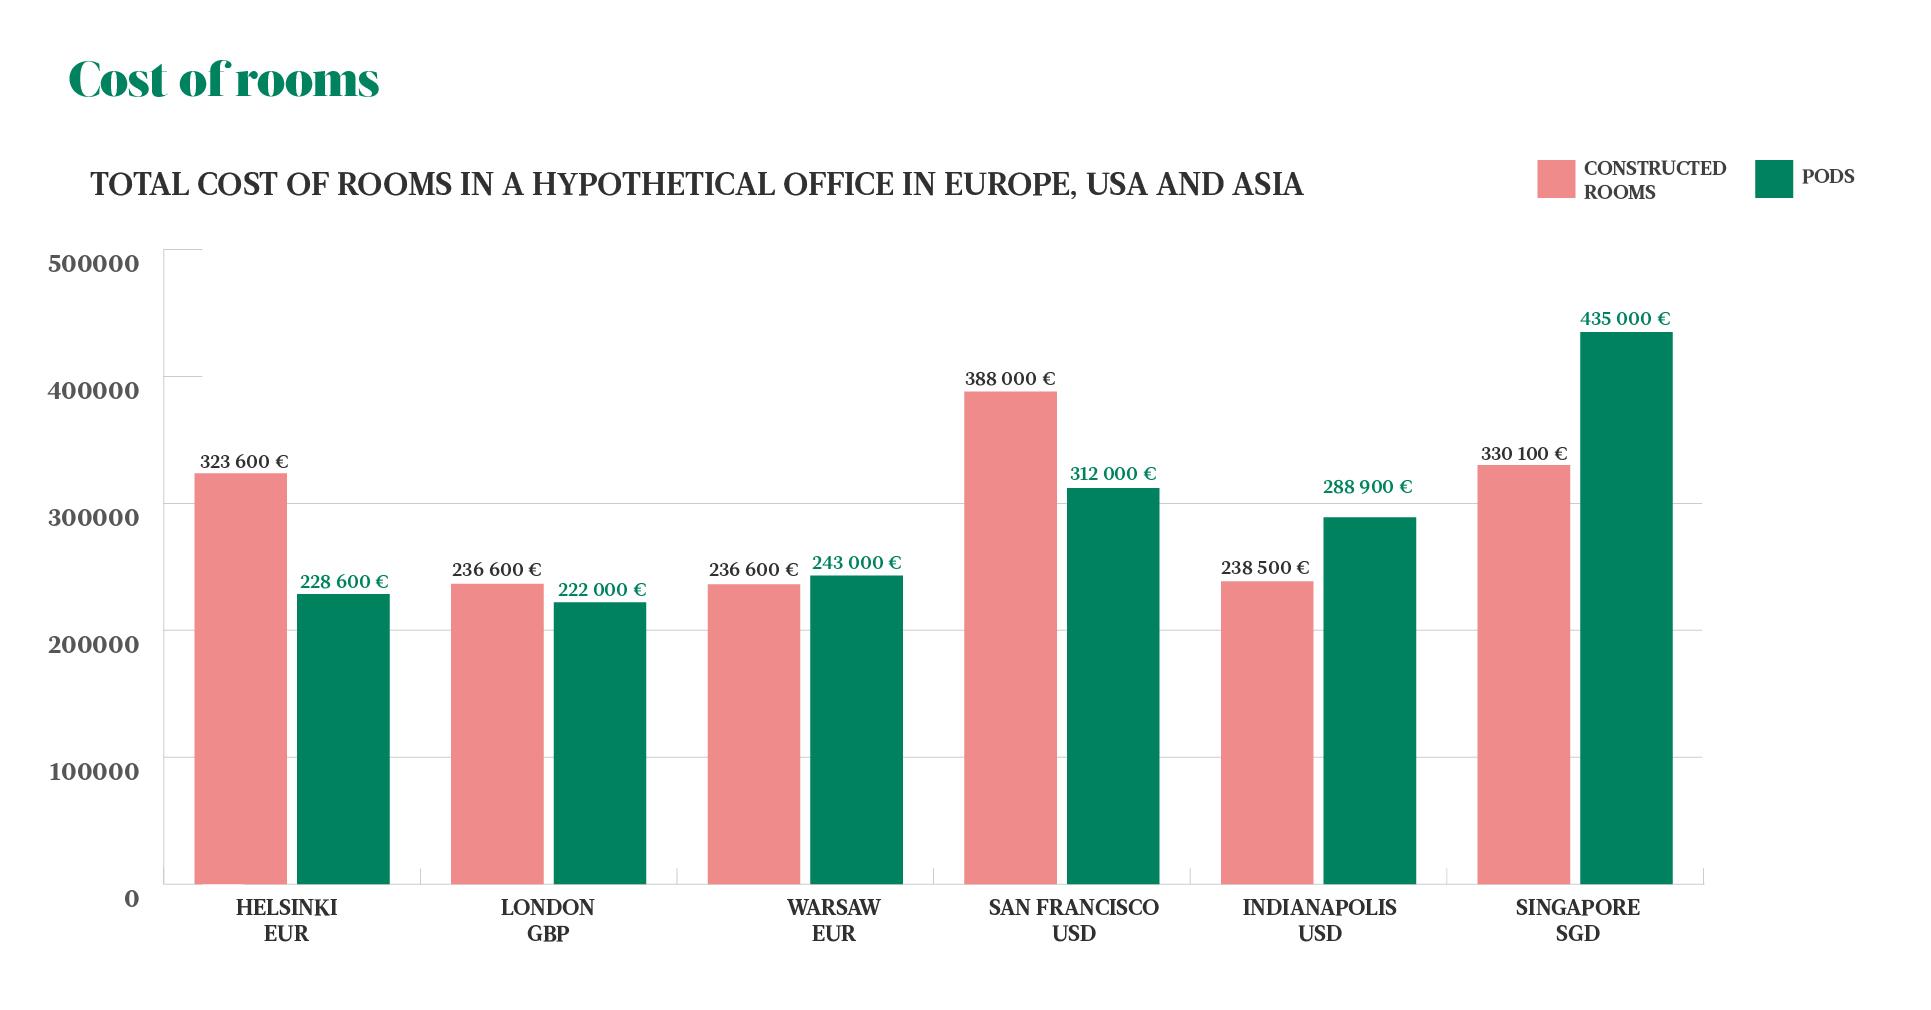 The graph displays the total cost of constructing rooms in a hypothetical office in different markets